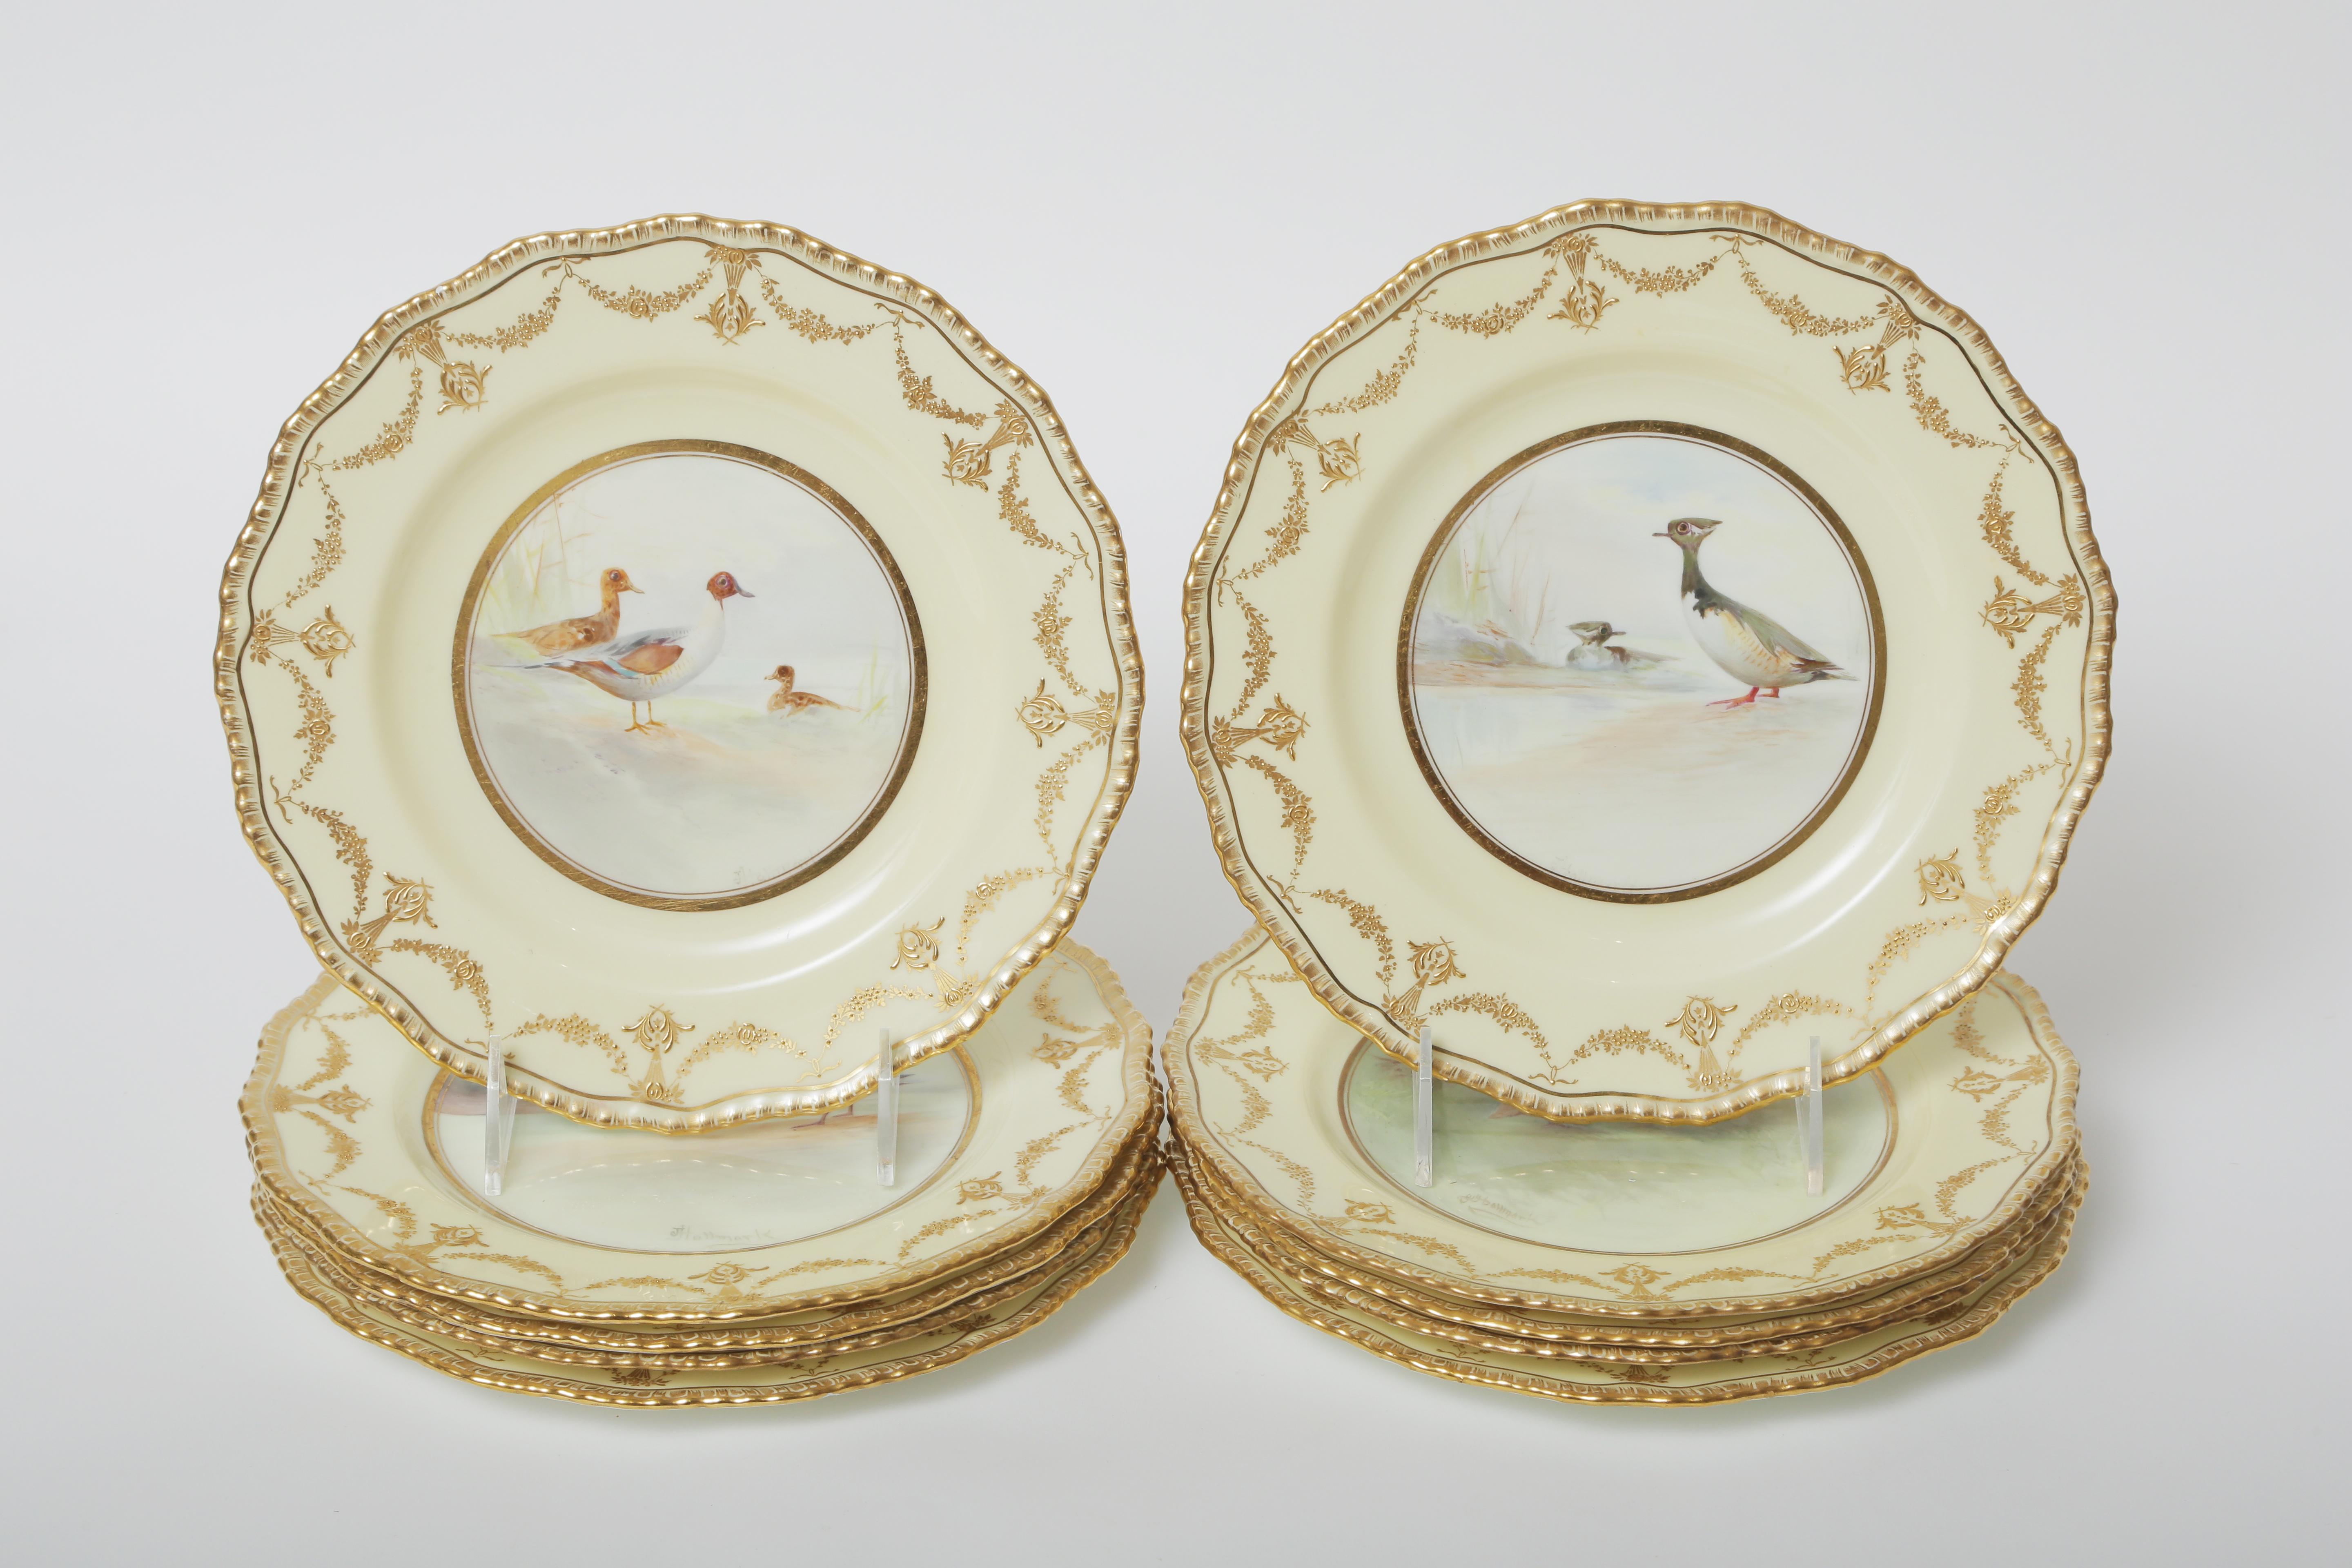 10 Royal Doulton, England circa 1910 hand painted cabinet plates. All are signed by the artist J Hallmark and feature full flora fauna backgrounds in the birds natural Habitat. They have a nice slightly scalloped 24-karat gold trim shape and are